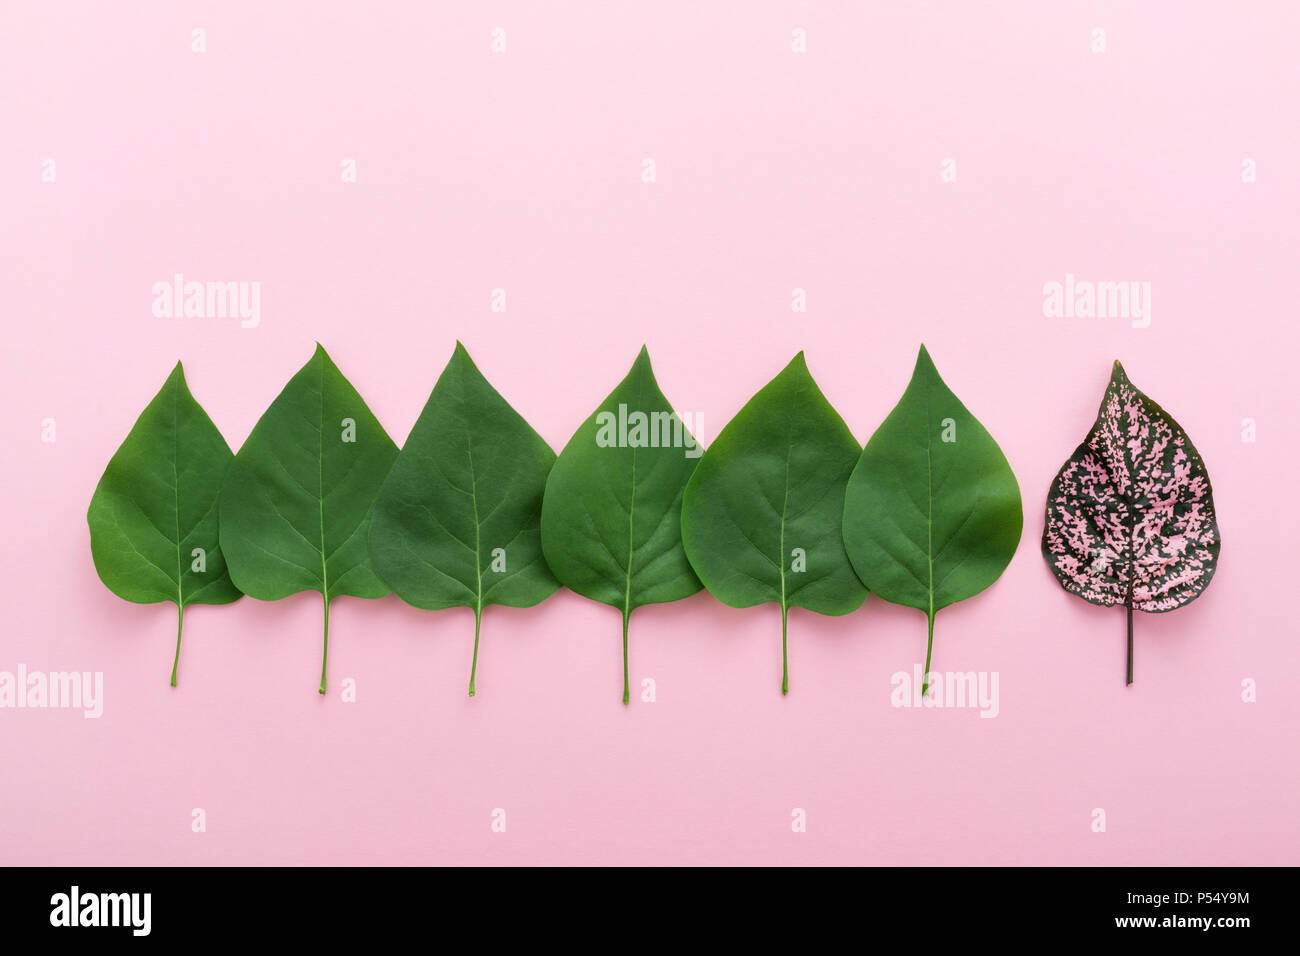 Group of green leaves and outstanding one on pink. Leader & team or followers concept. Minimal, copy space. Stock Photo